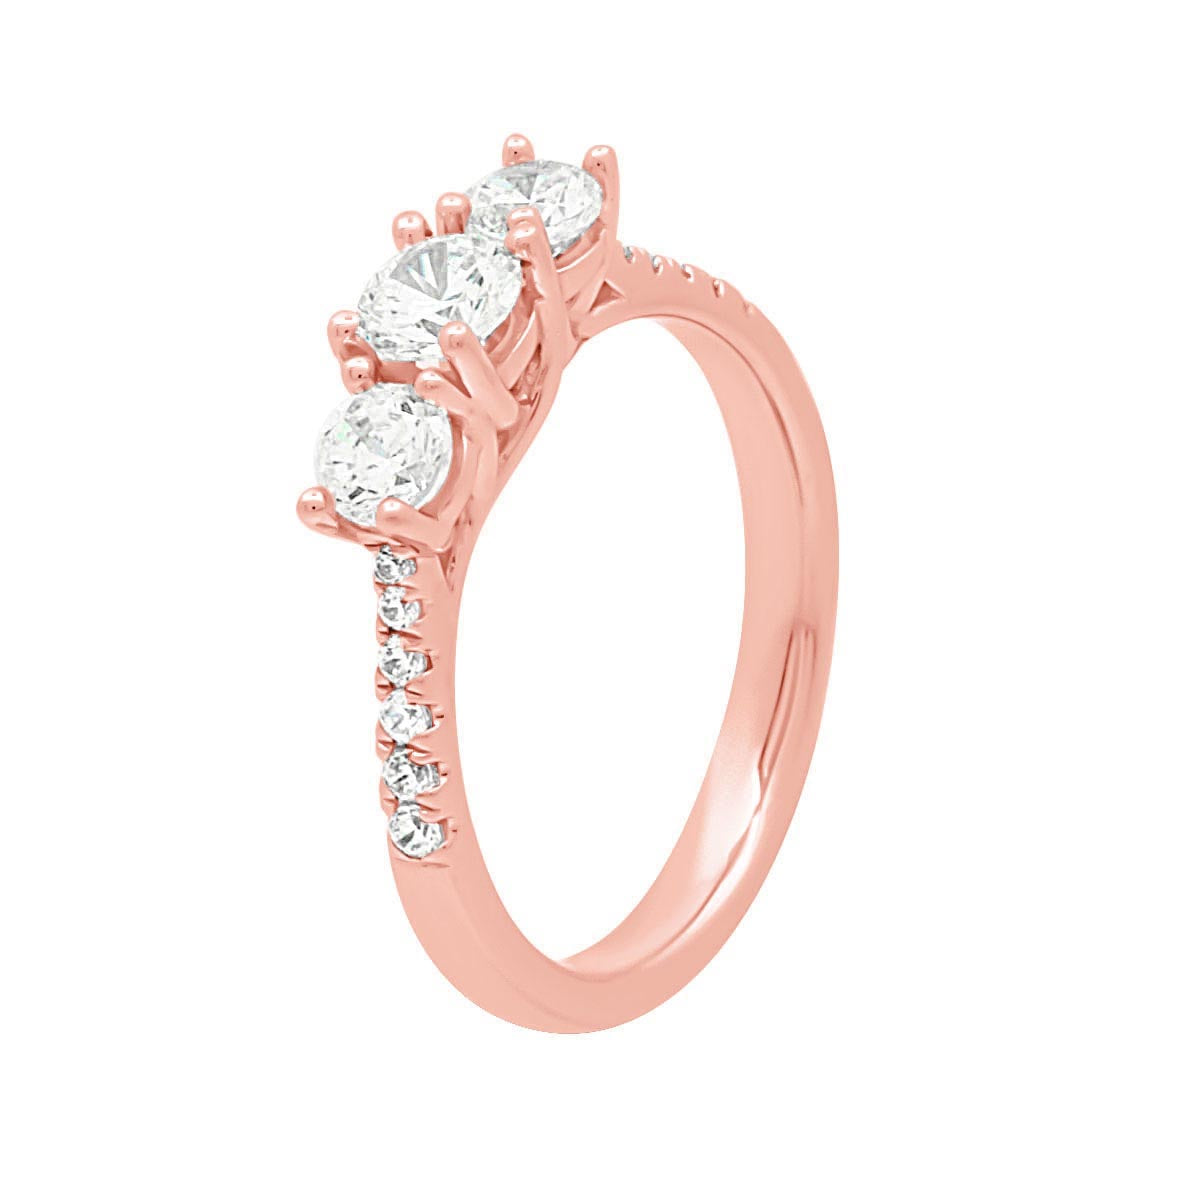 3 Stone Engagement Ring in rose gold in angled view